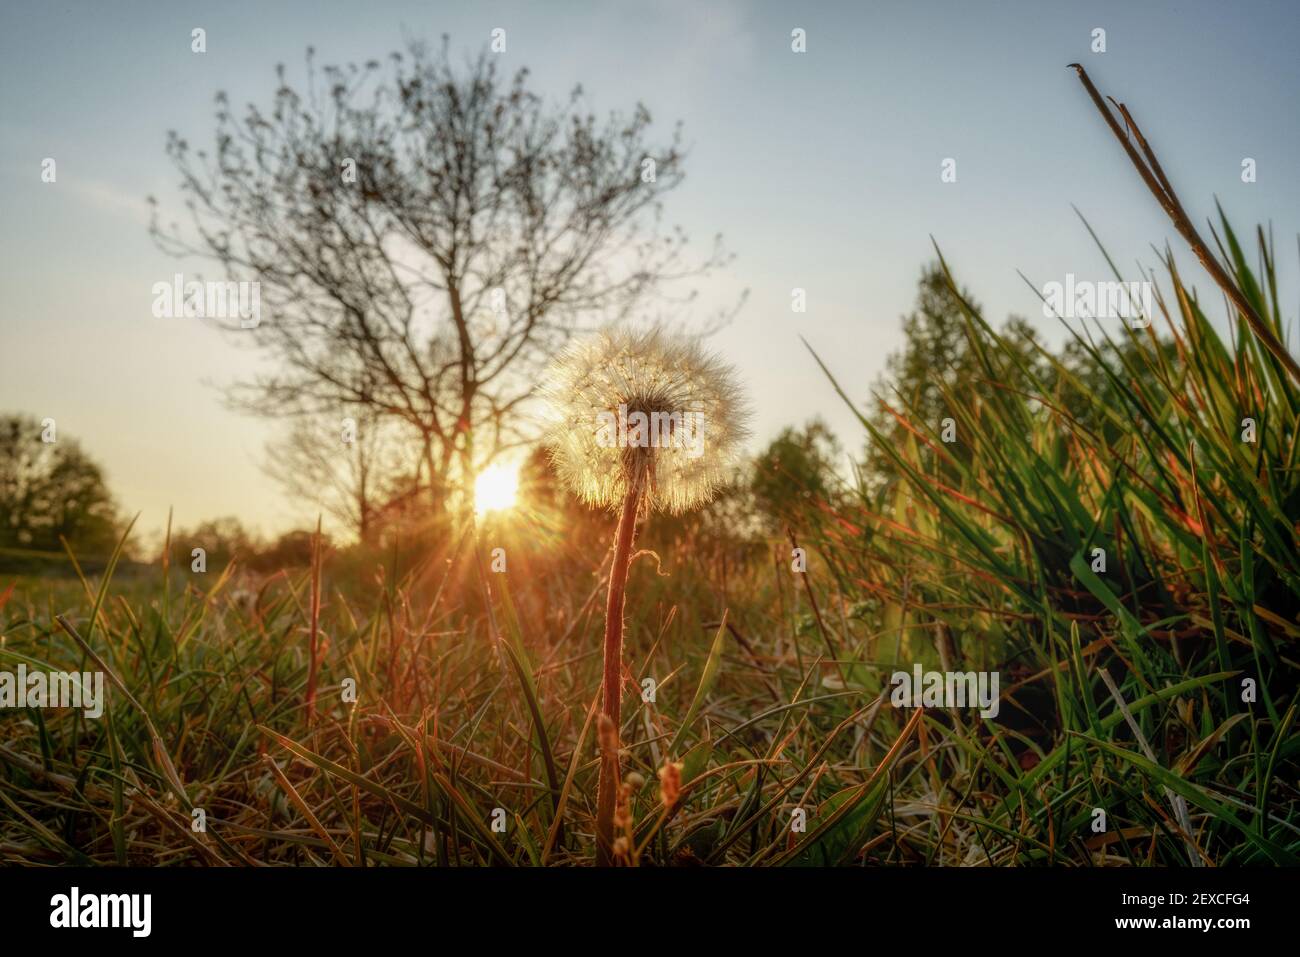 A dandelion in the evening red light of the evening sun Stock Photo